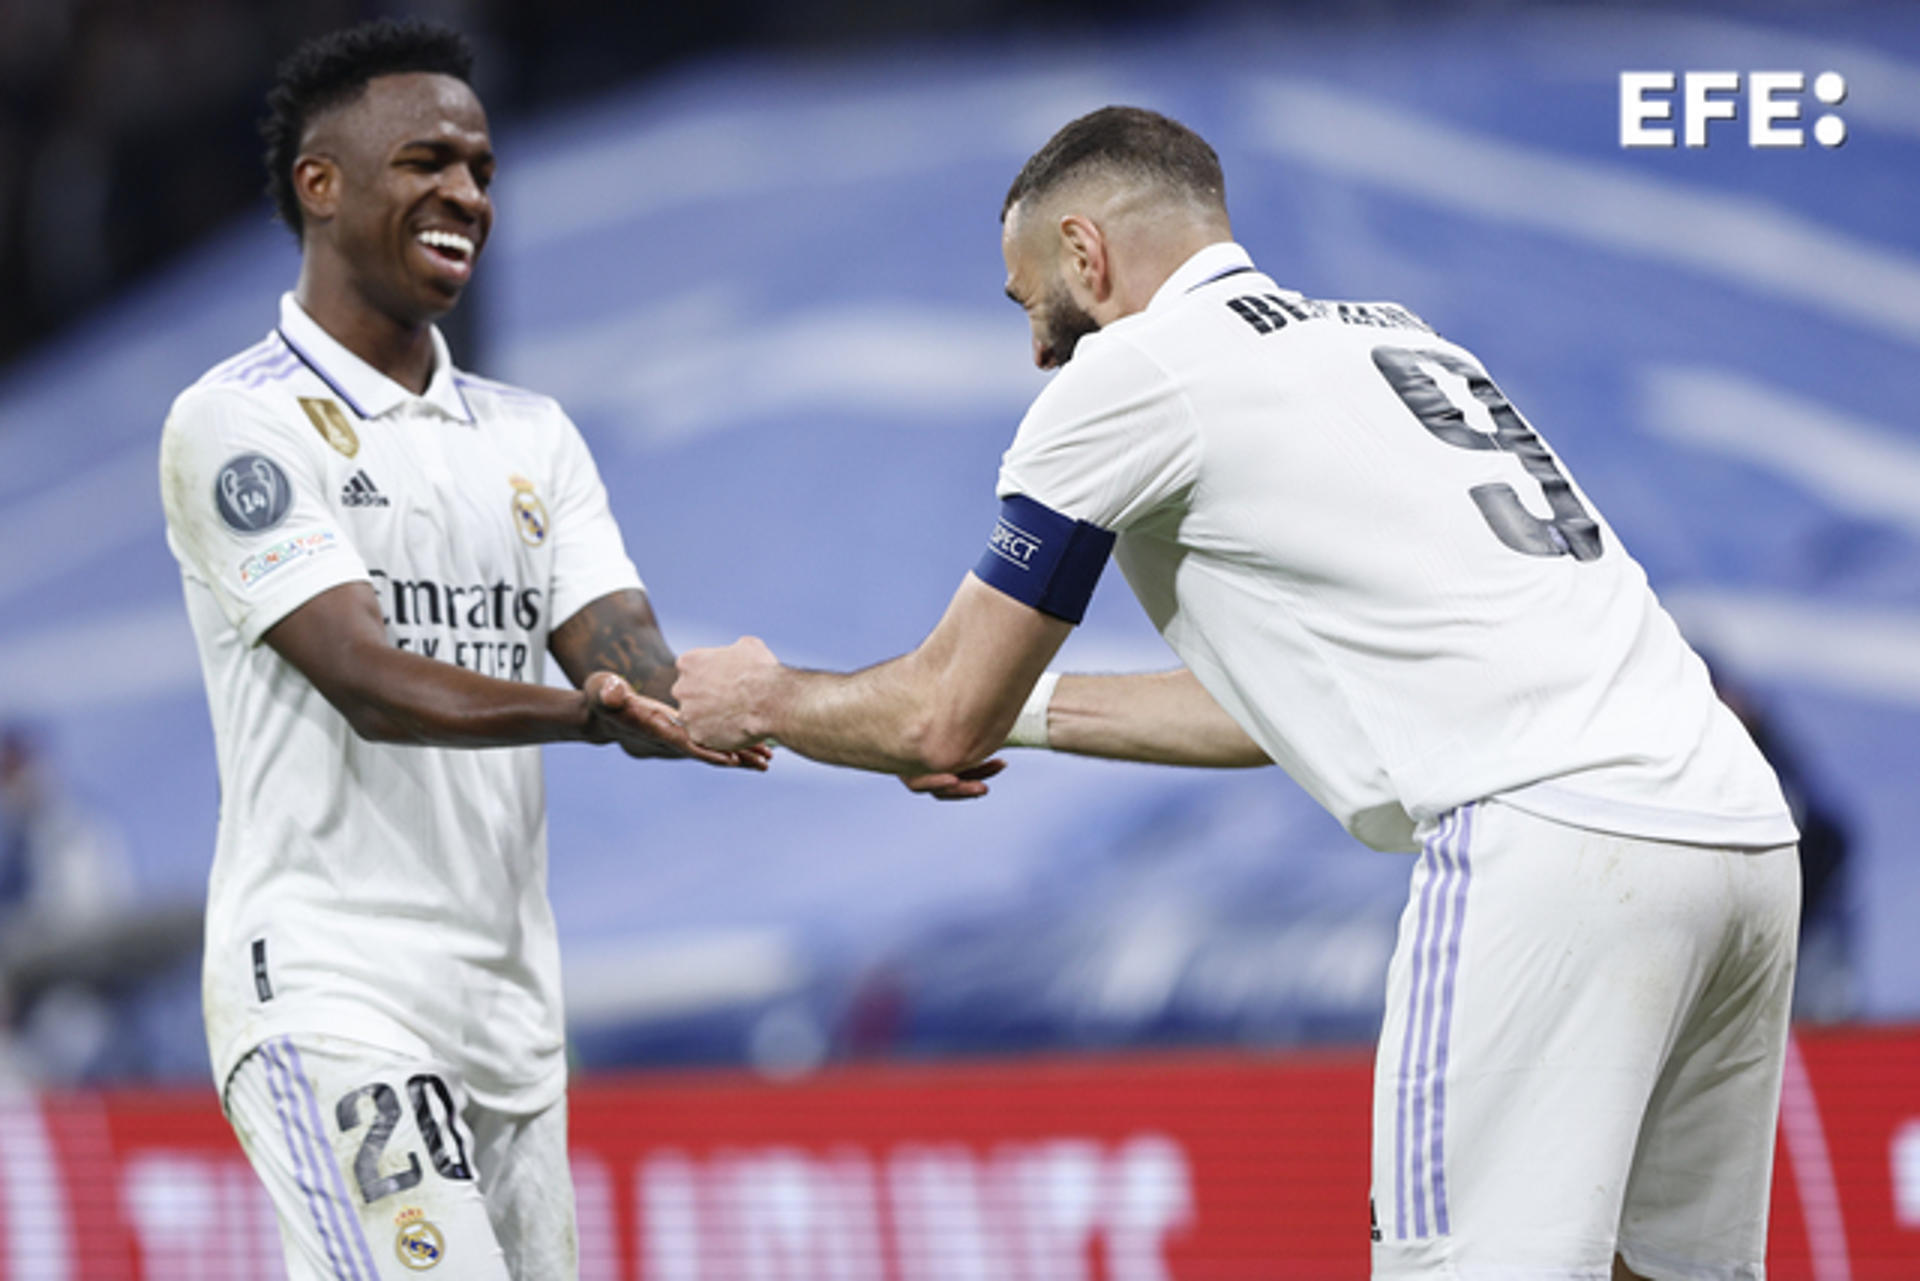 Real Madrid's Karim Benzema (R) celebrates with teammate Vinicius Jr . after scoring against Liverpool during the Champions League round of 16 second leg at the Santiago Bernabeu in Madrid on 15 March 2023. EFE/Rodrigo Jimenez